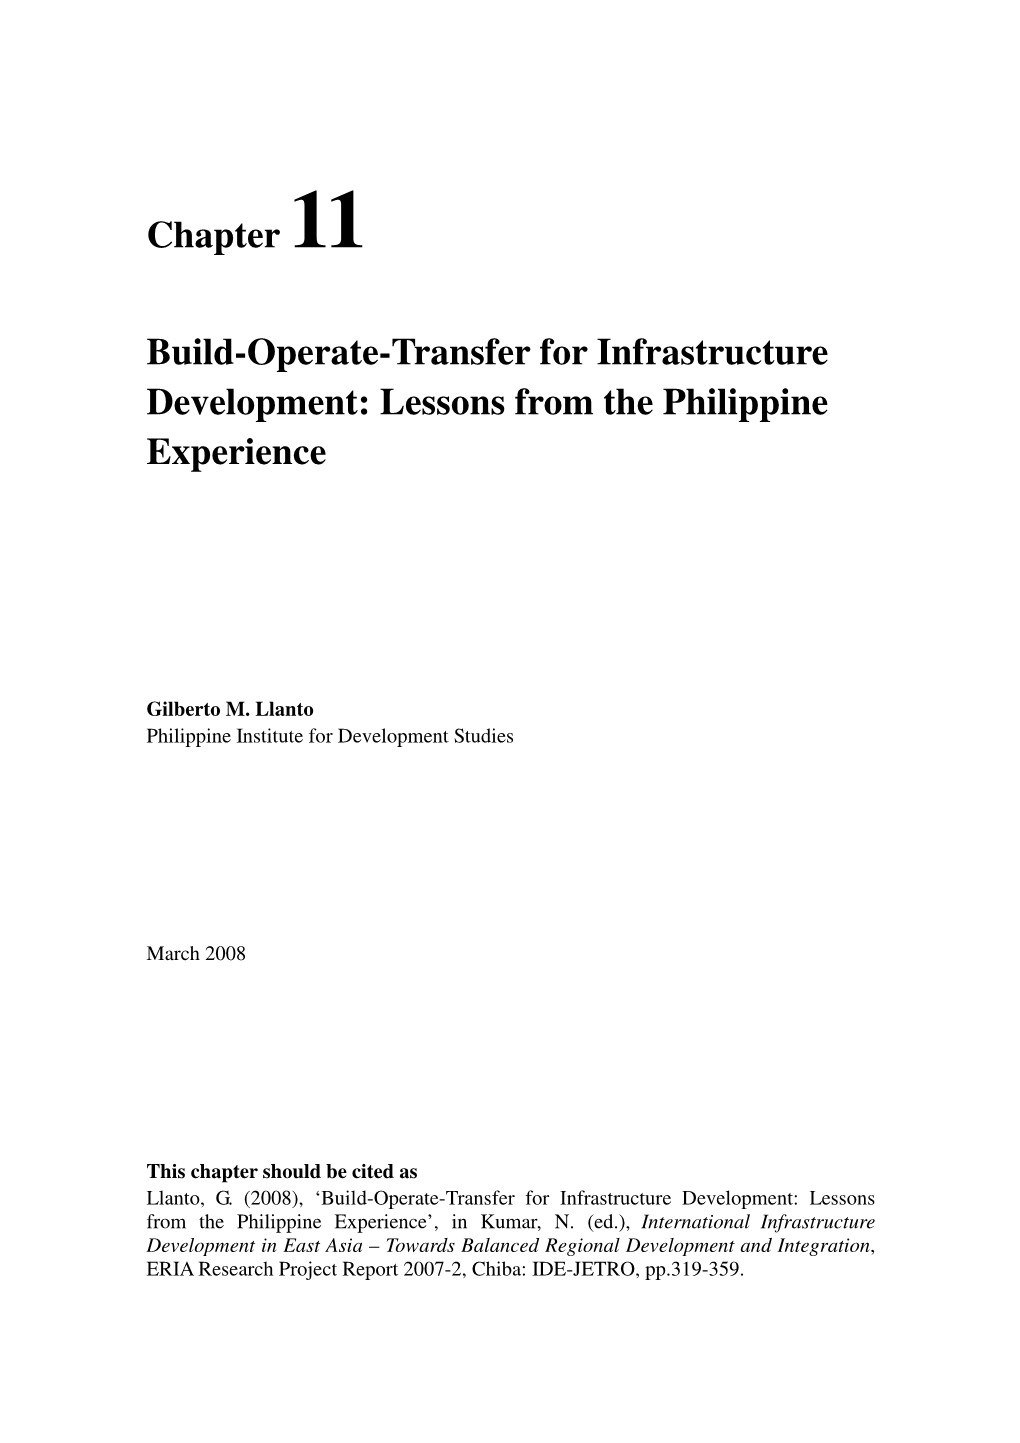 Chapter 11 Build-Operate-Transfer for Infrastructure Development